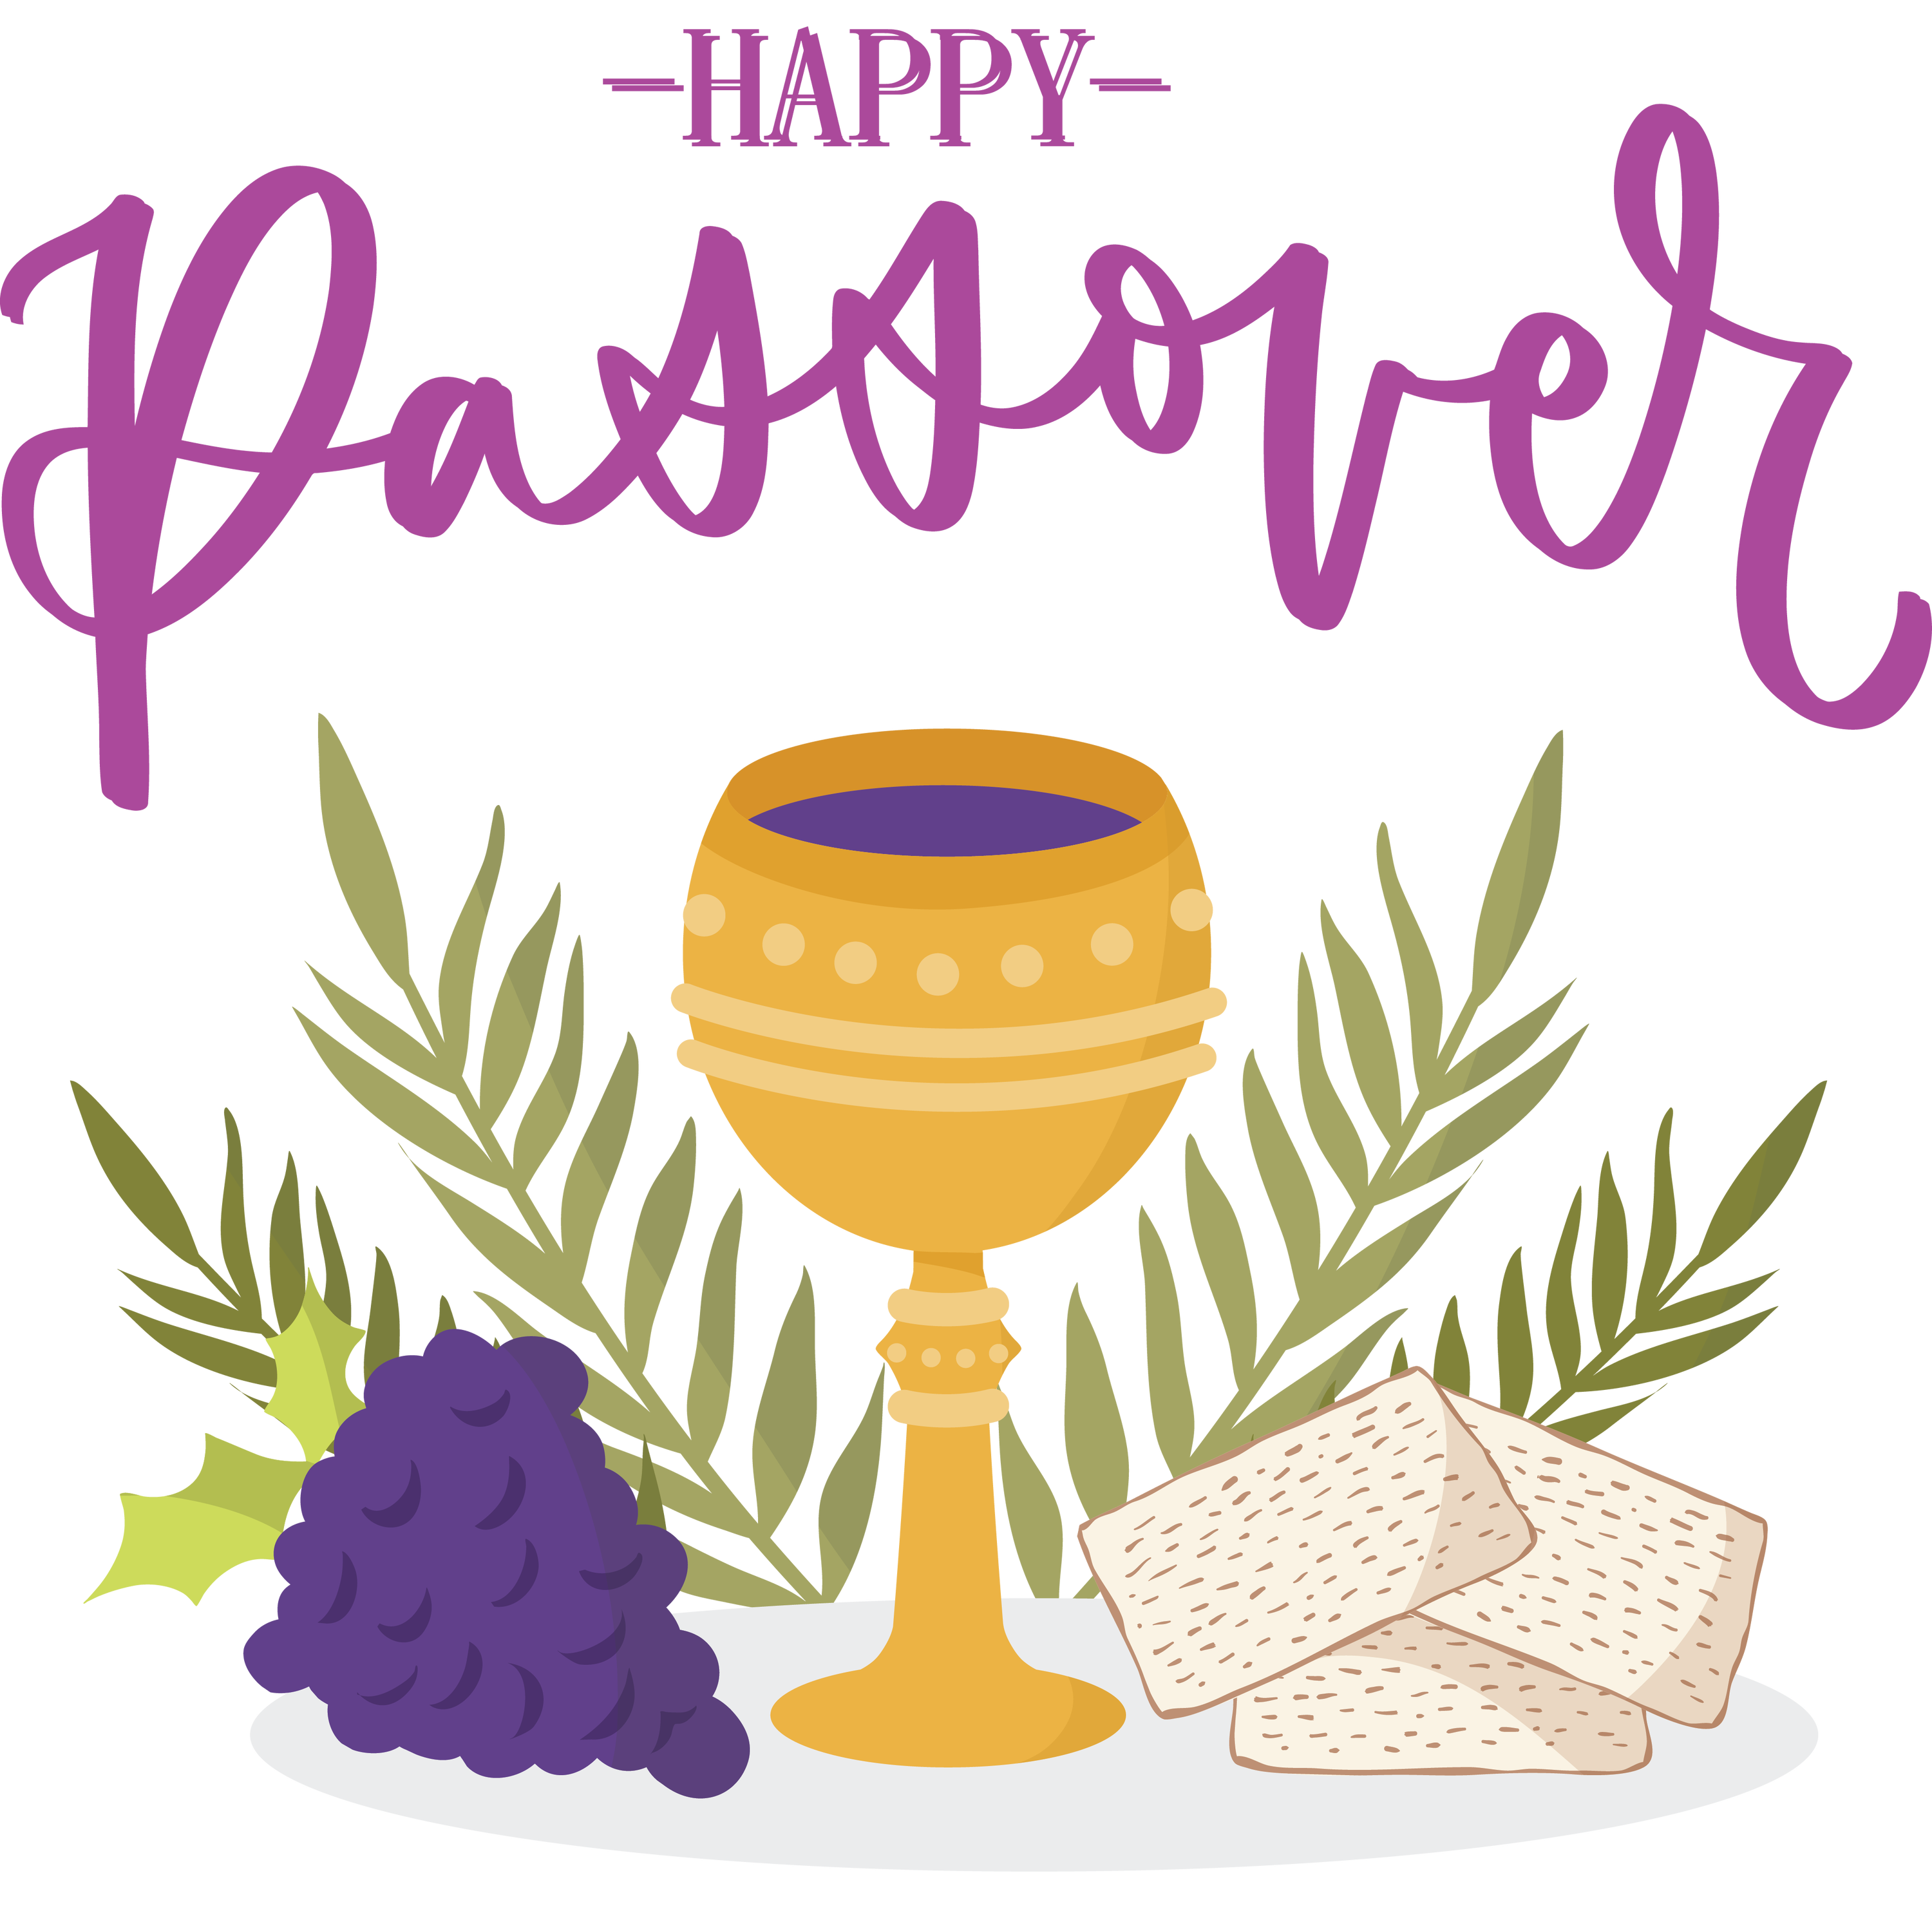 Happy Passover Download Transparent PNG Image